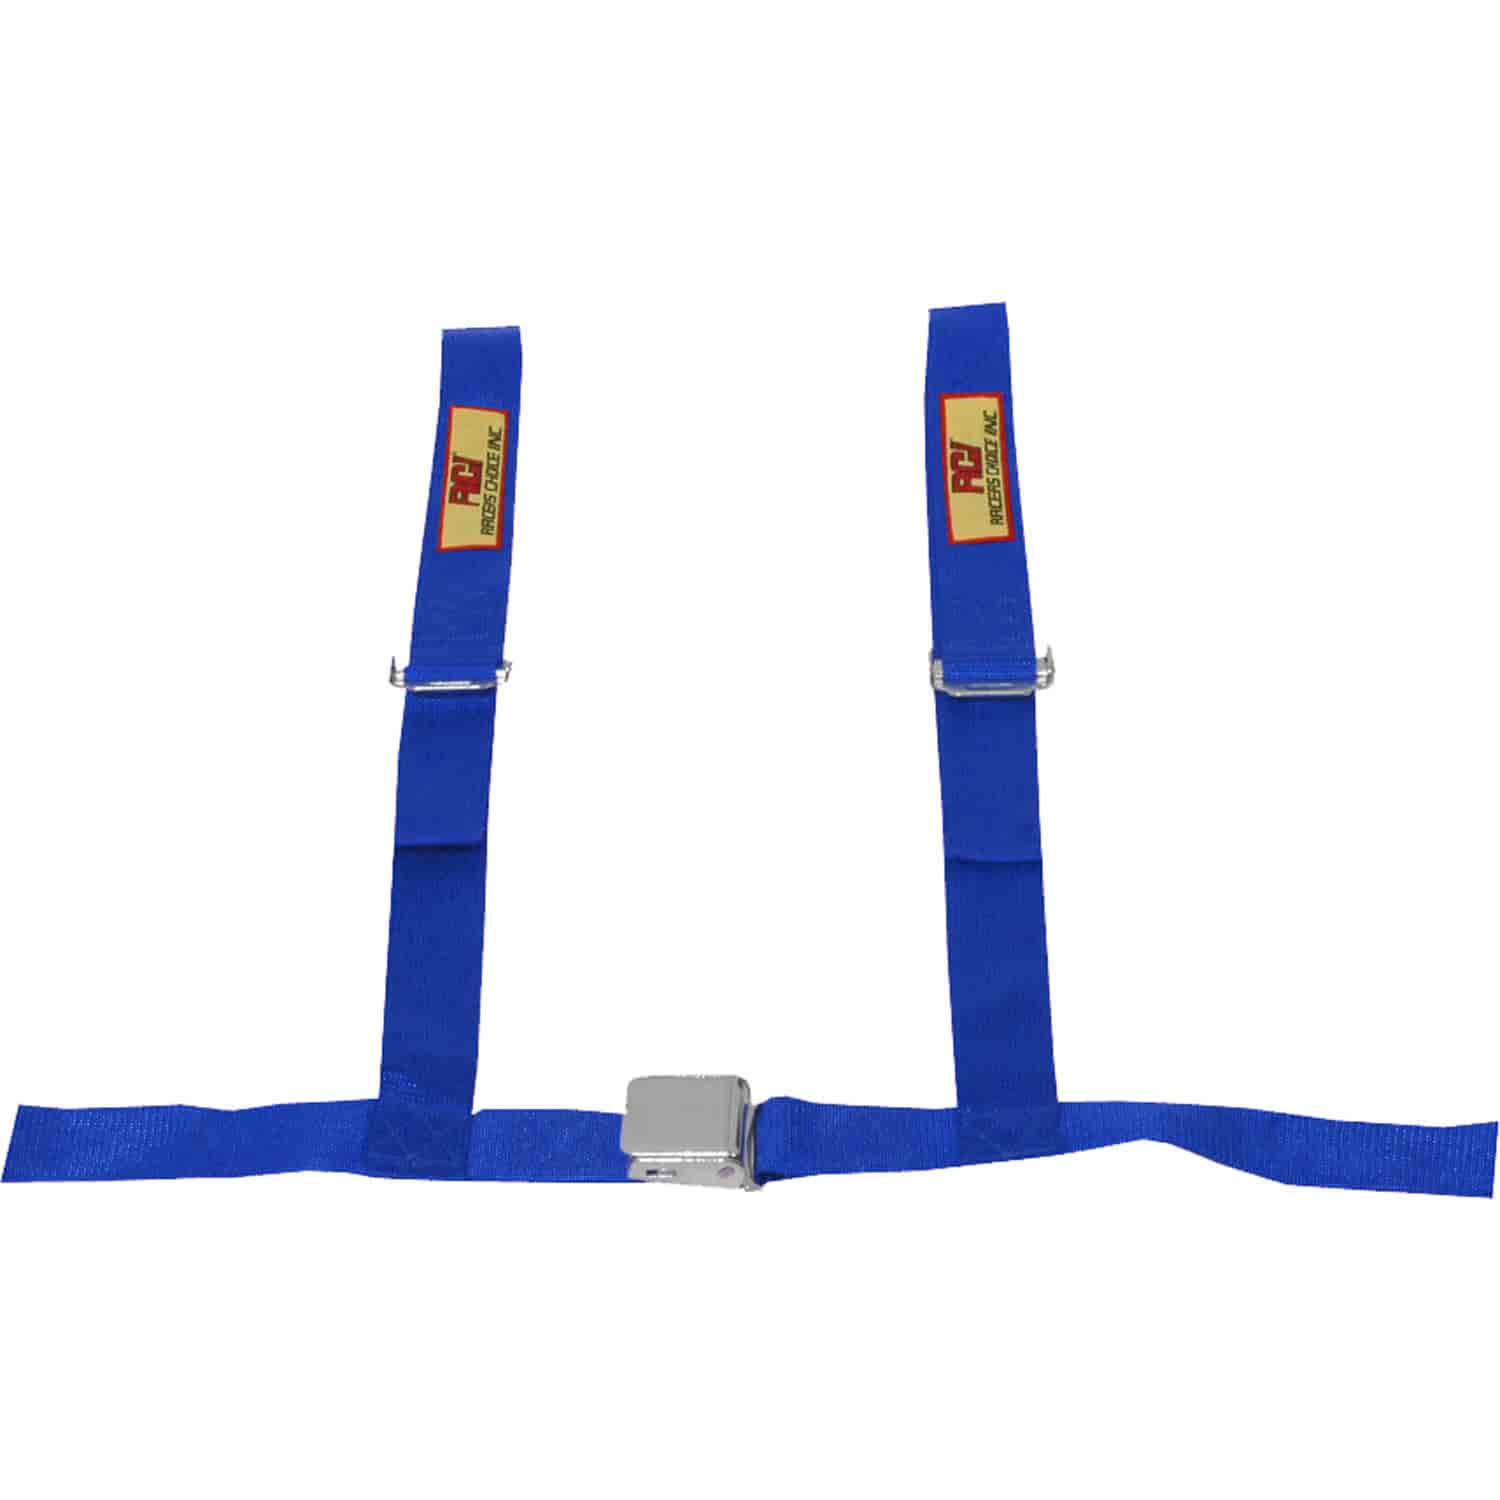 Non-SFI 4-Point Racing Harness Blue